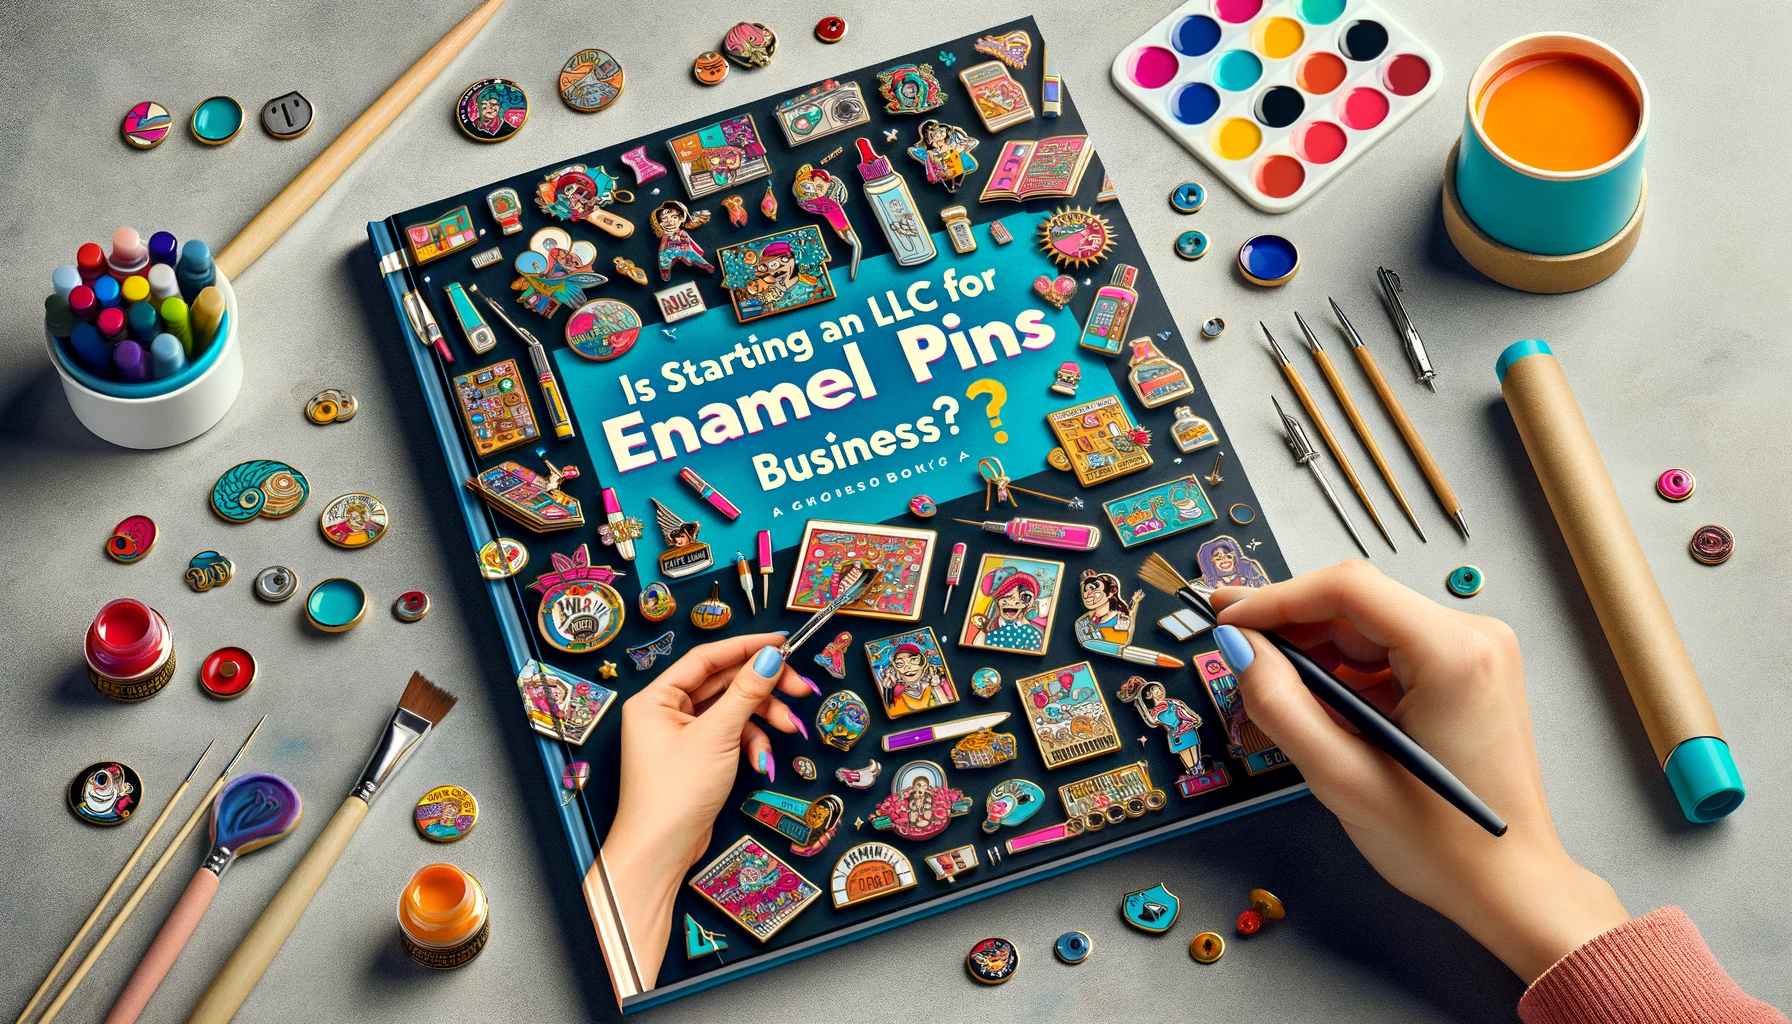 https://www.moneyaisle.com/wp-content/uploads/2023/10/A-guidebook-cover-titled-Is-Starting-an-LLC-for-Enamel-Pins-Business-a-Good-Idea_.-The-design-is-creative-and-colorful-reflecting-the-artistic-and-.png